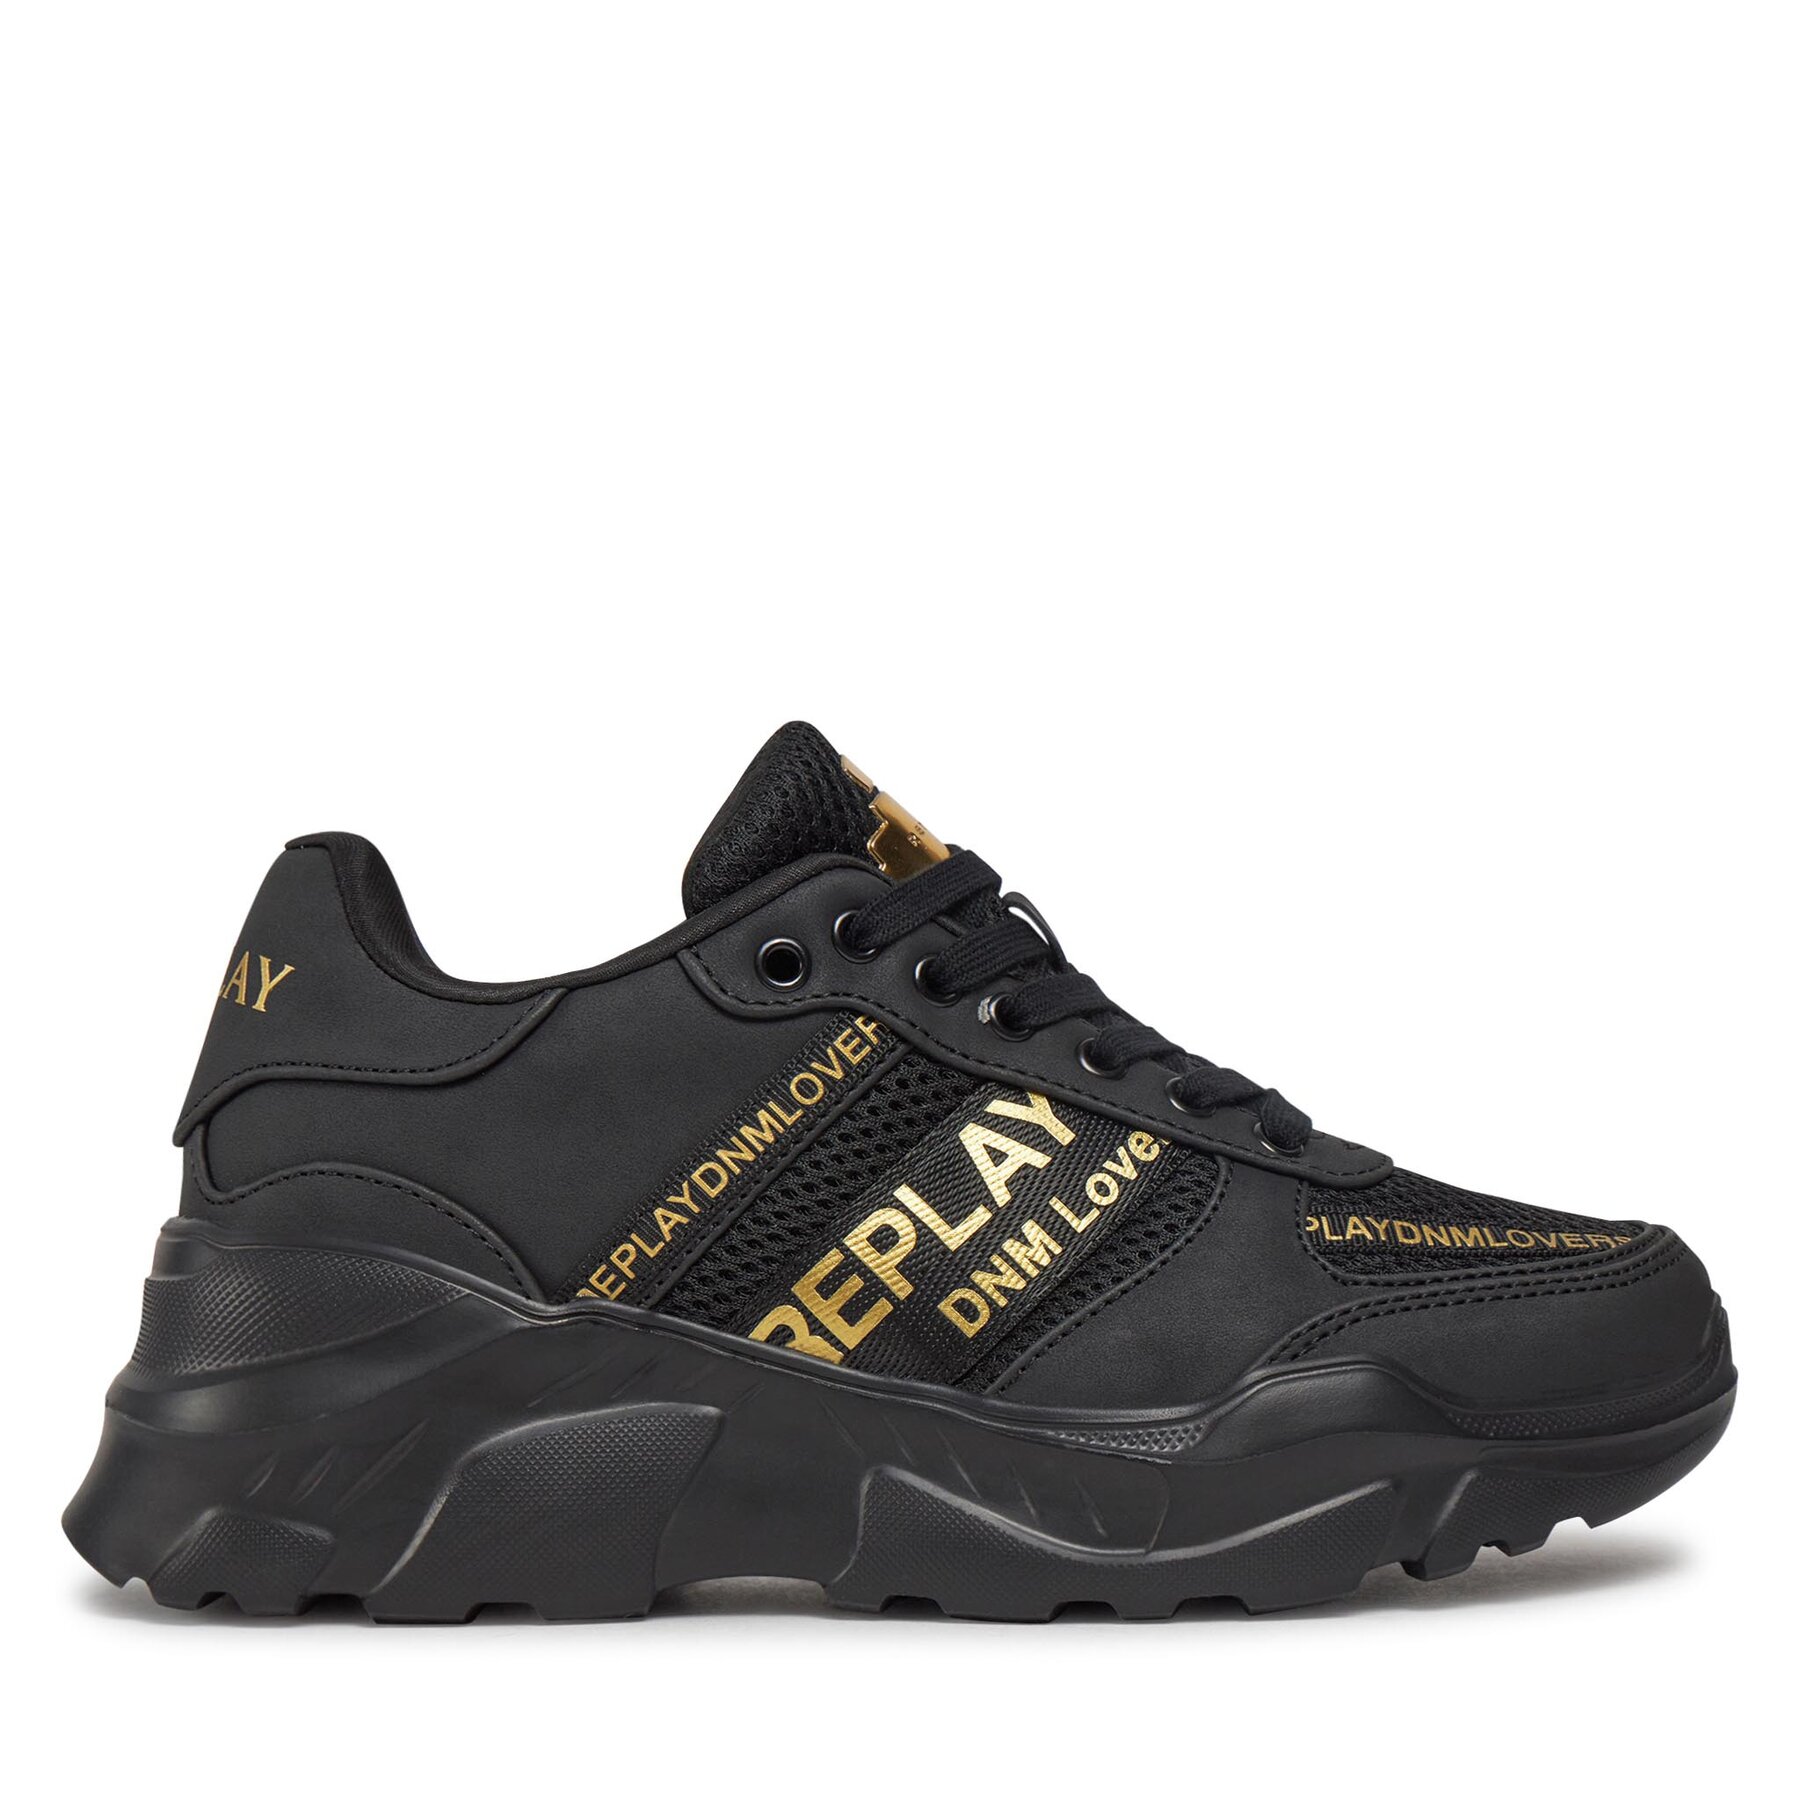 Sneakers Replay GWS7Z .000.C0007S Black Gold von Replay